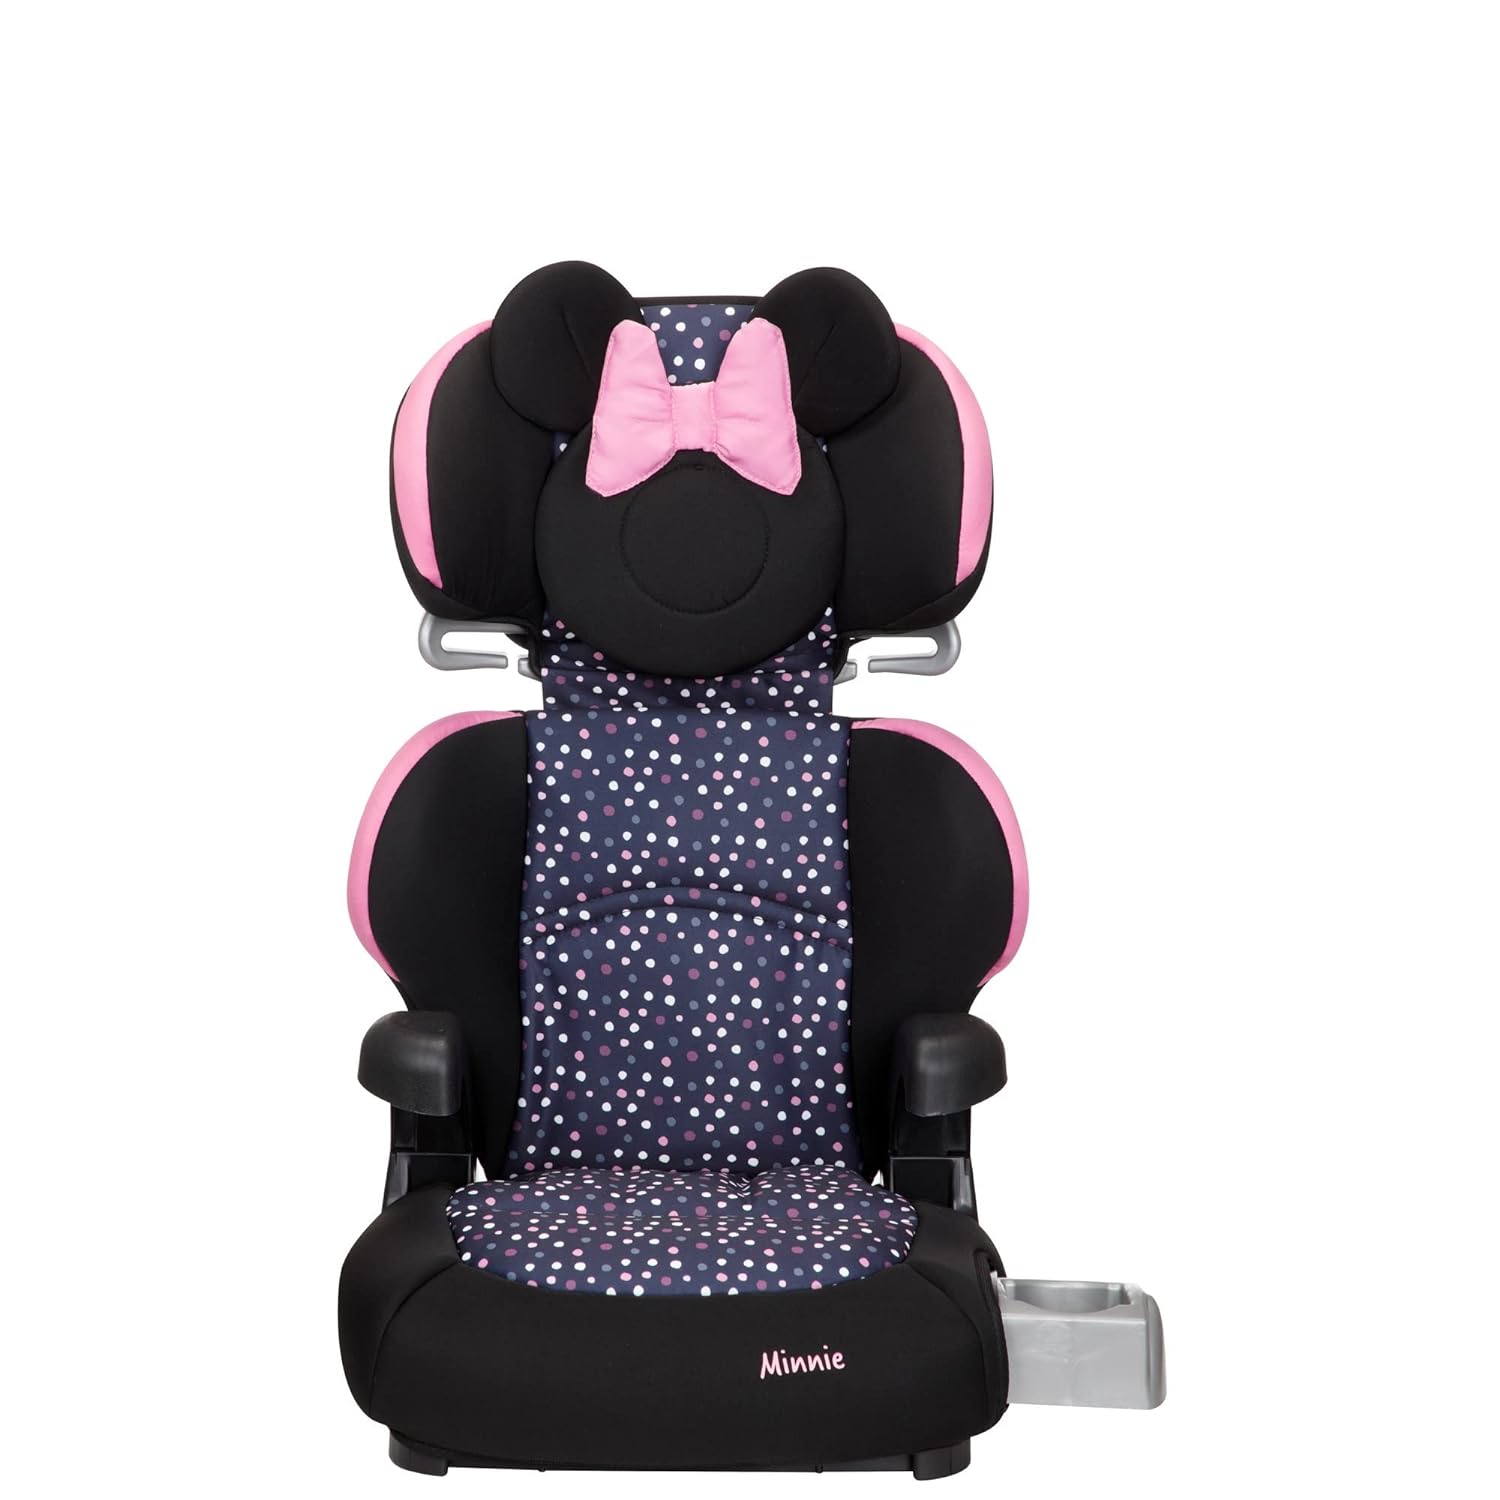 Disney Baby Pronto! Belt-Positioning Booster Car Seat, Belt-Positioning Booster: 40\u2013100 pounds, Minnie Dot Party